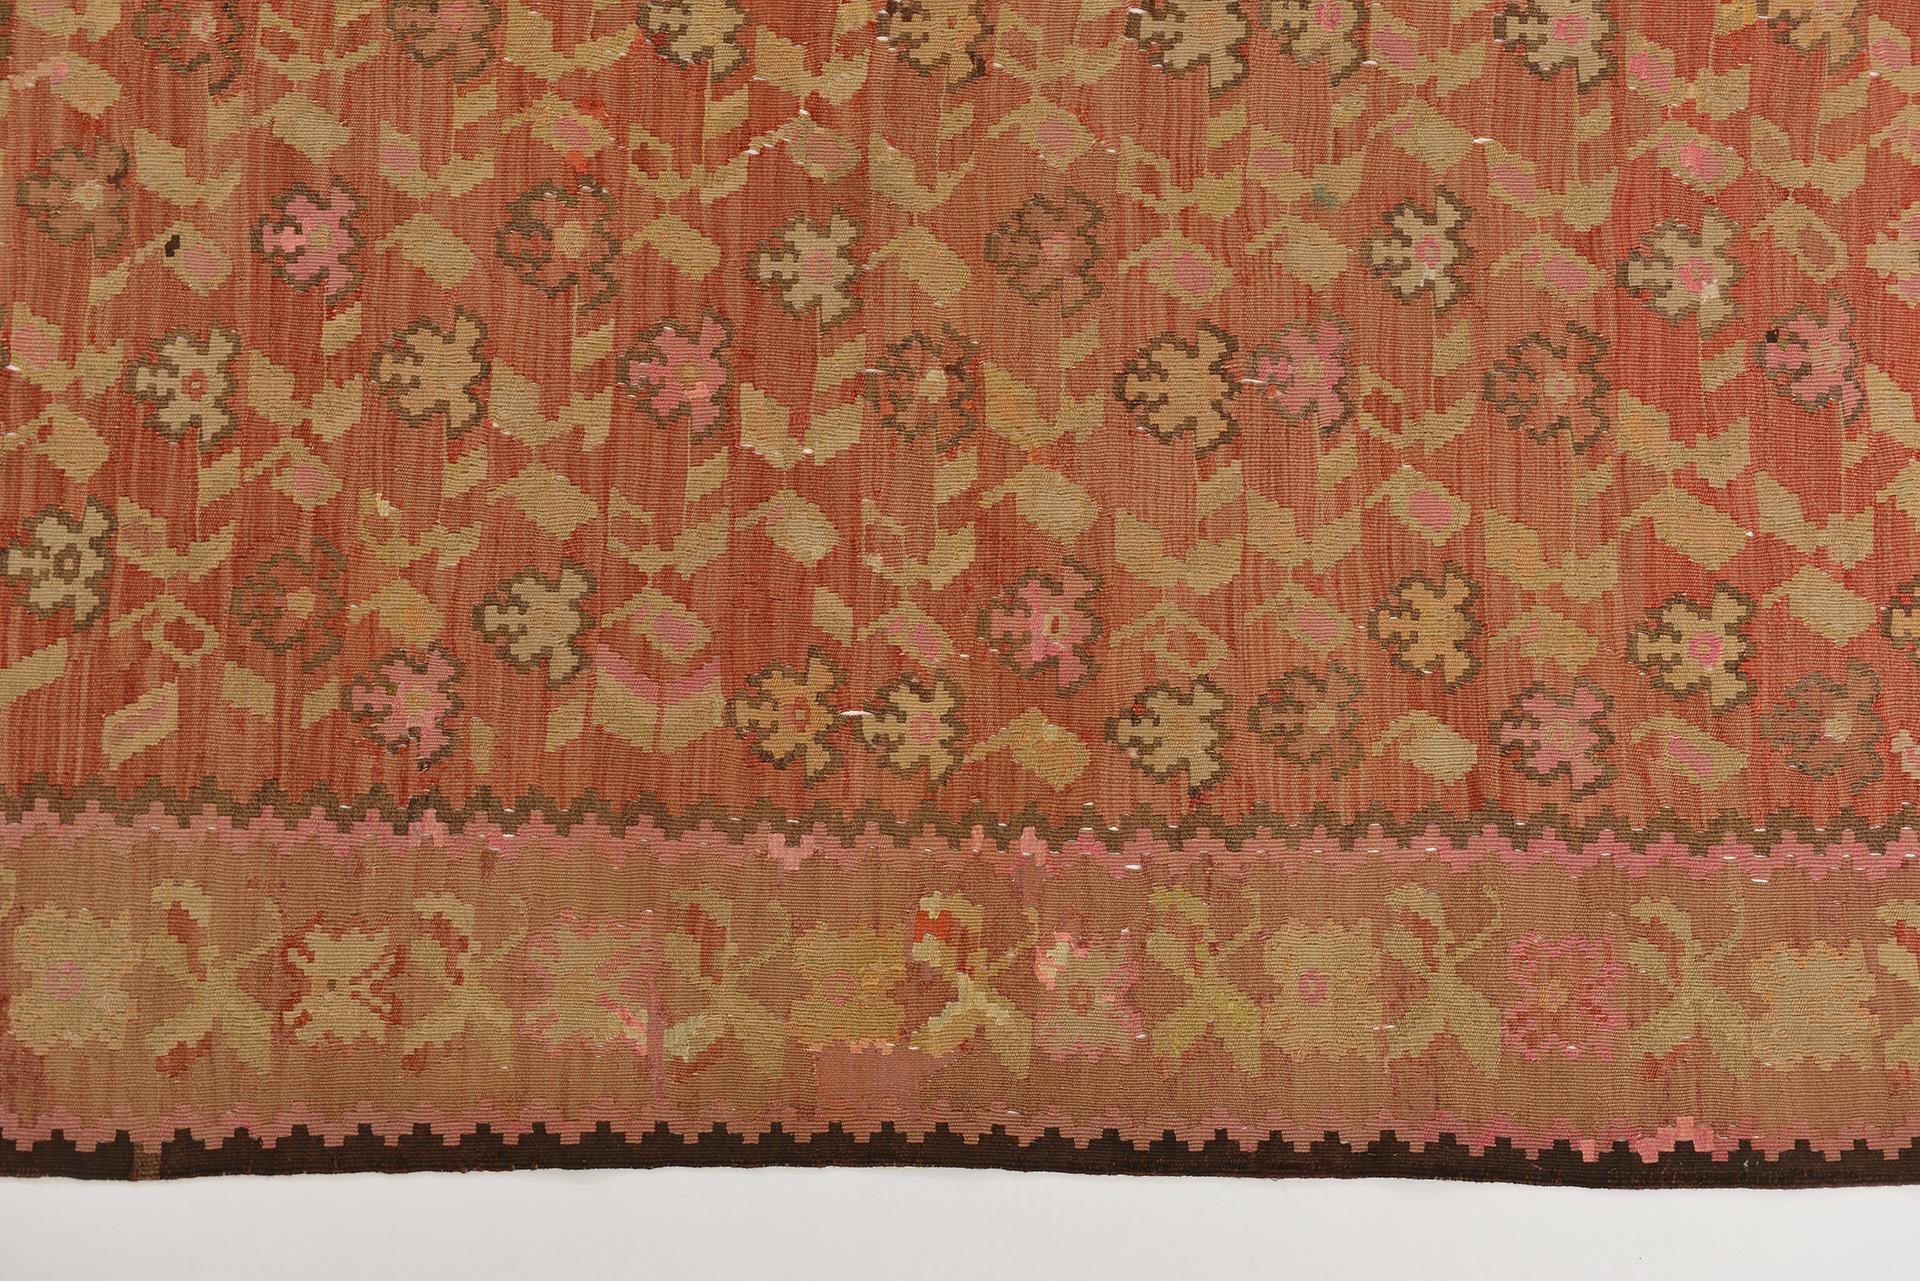 Hand-Woven Old Dated KARABAGH Kilim For Sale